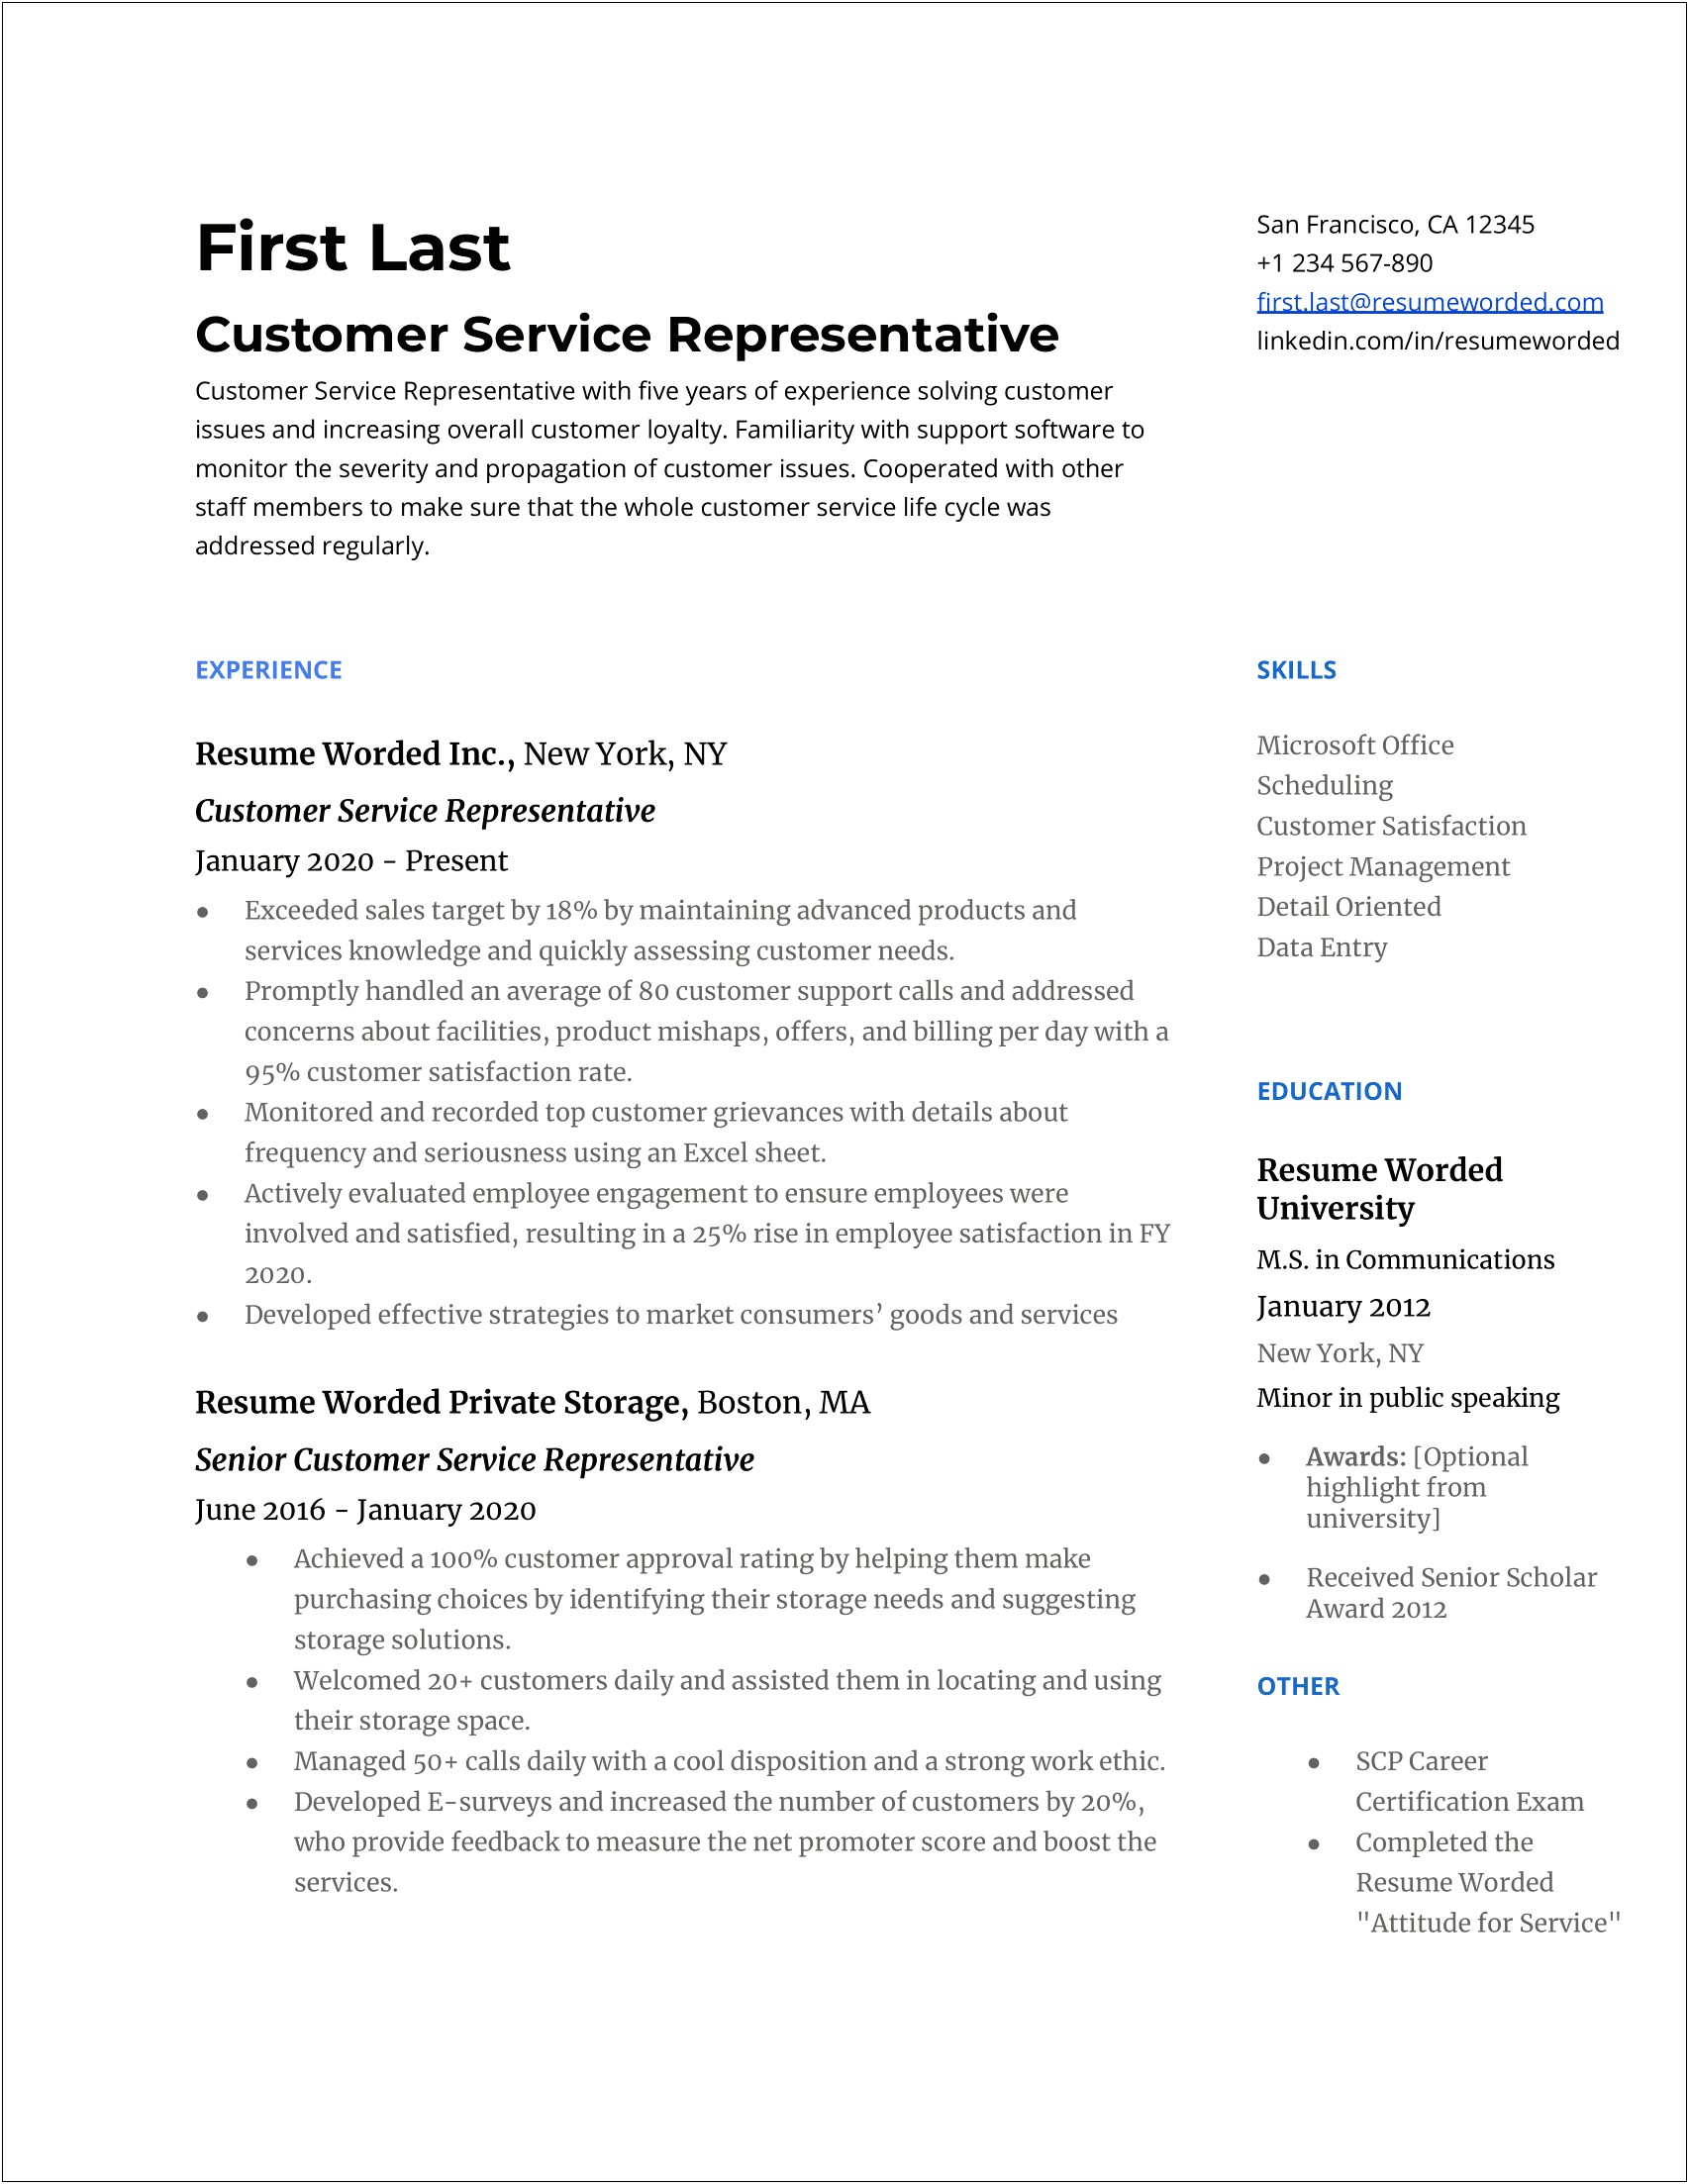 Example Profiles For A Csr Resume